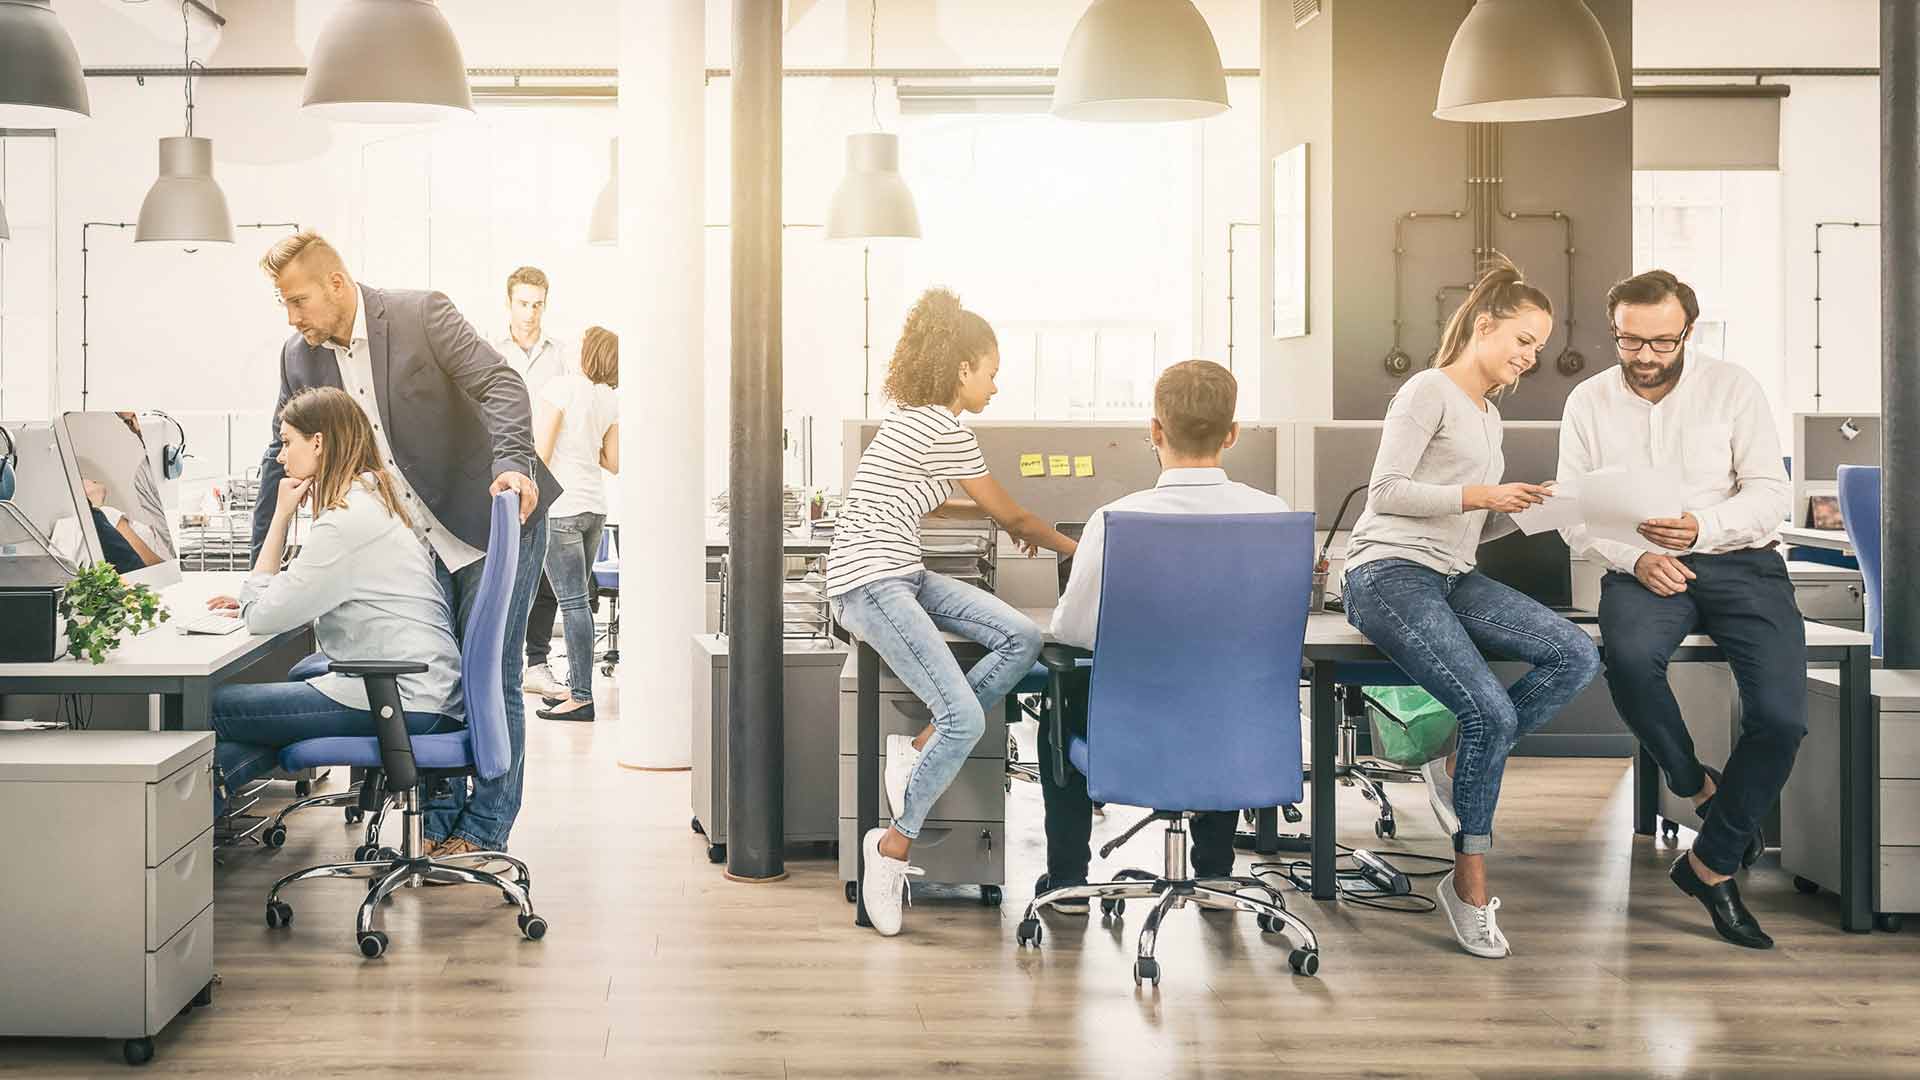 Finding the Right Office in Paris Region - 09_Coworking_AdobeStock_250036555_1920x1080